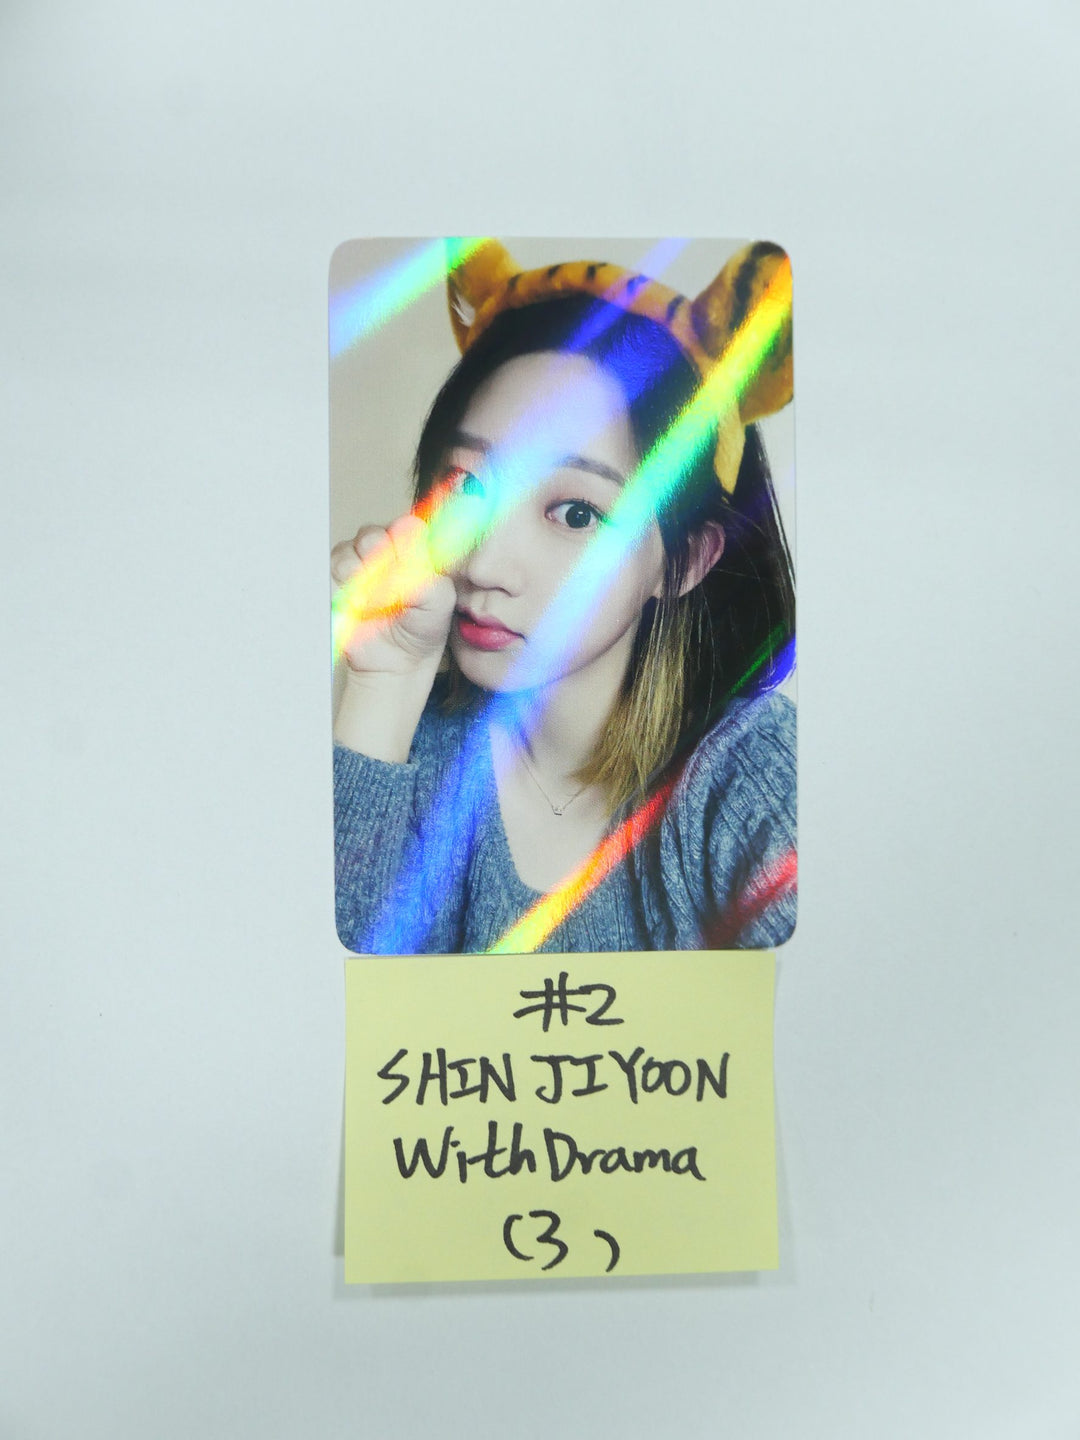 Weeekly "Play Game : AWAKE" - Withdrama Fansign Event Hologram Photocard